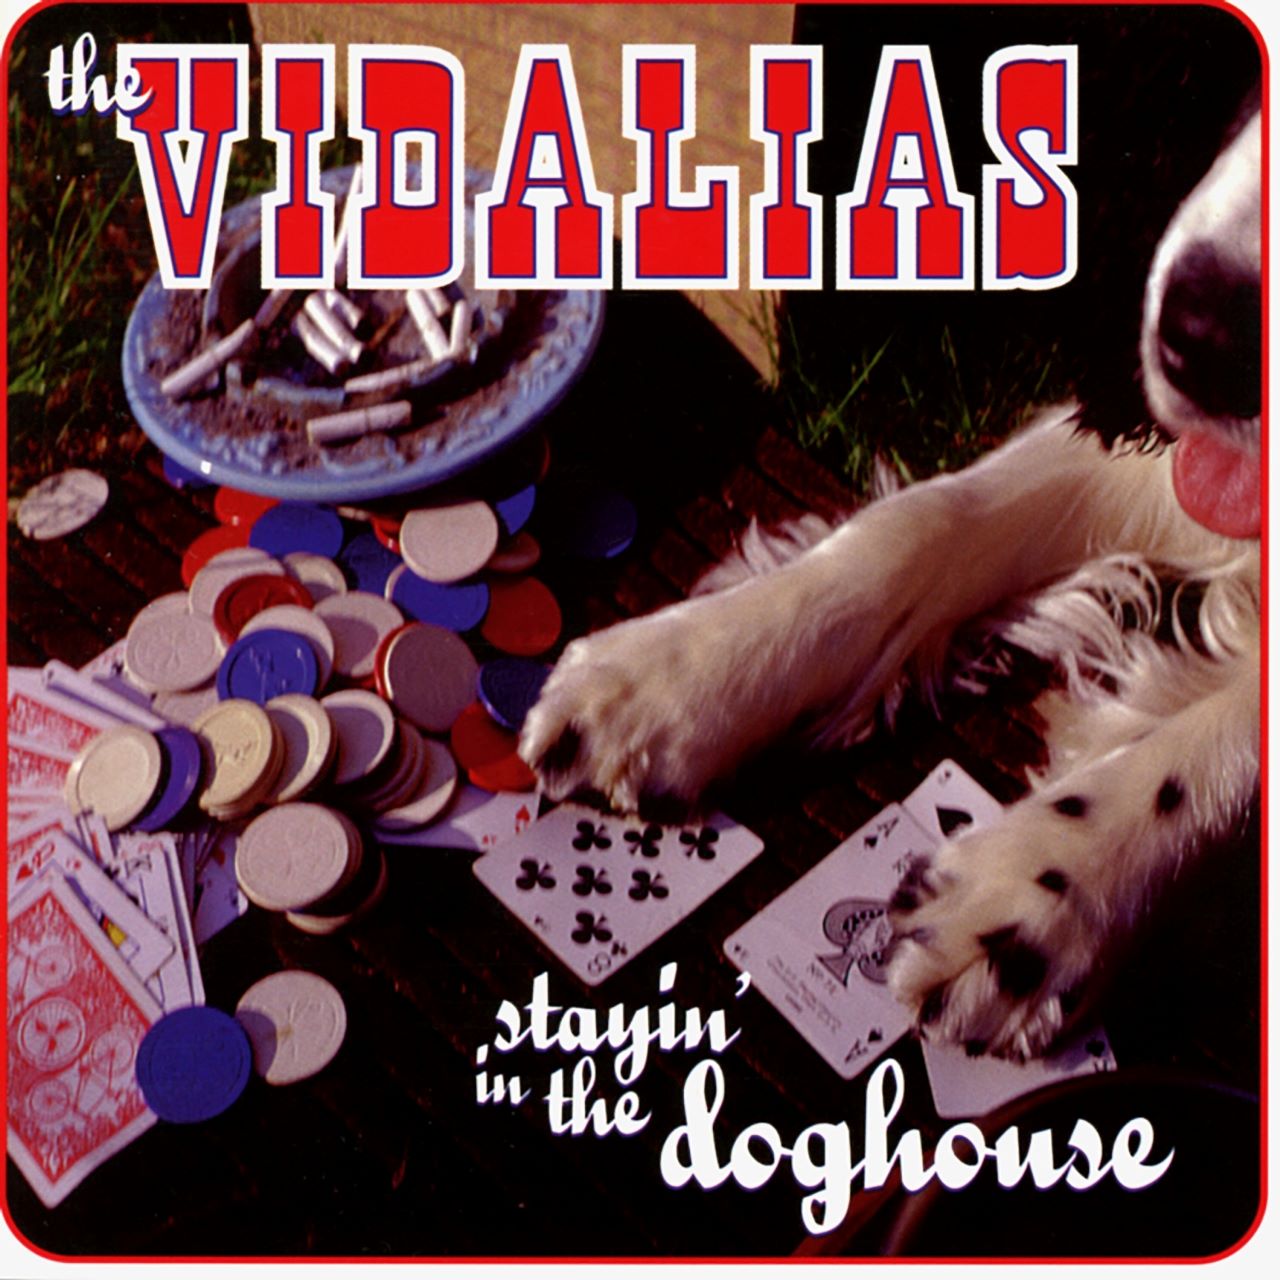 Vidalias - Stayin' In The Doghouse cover album